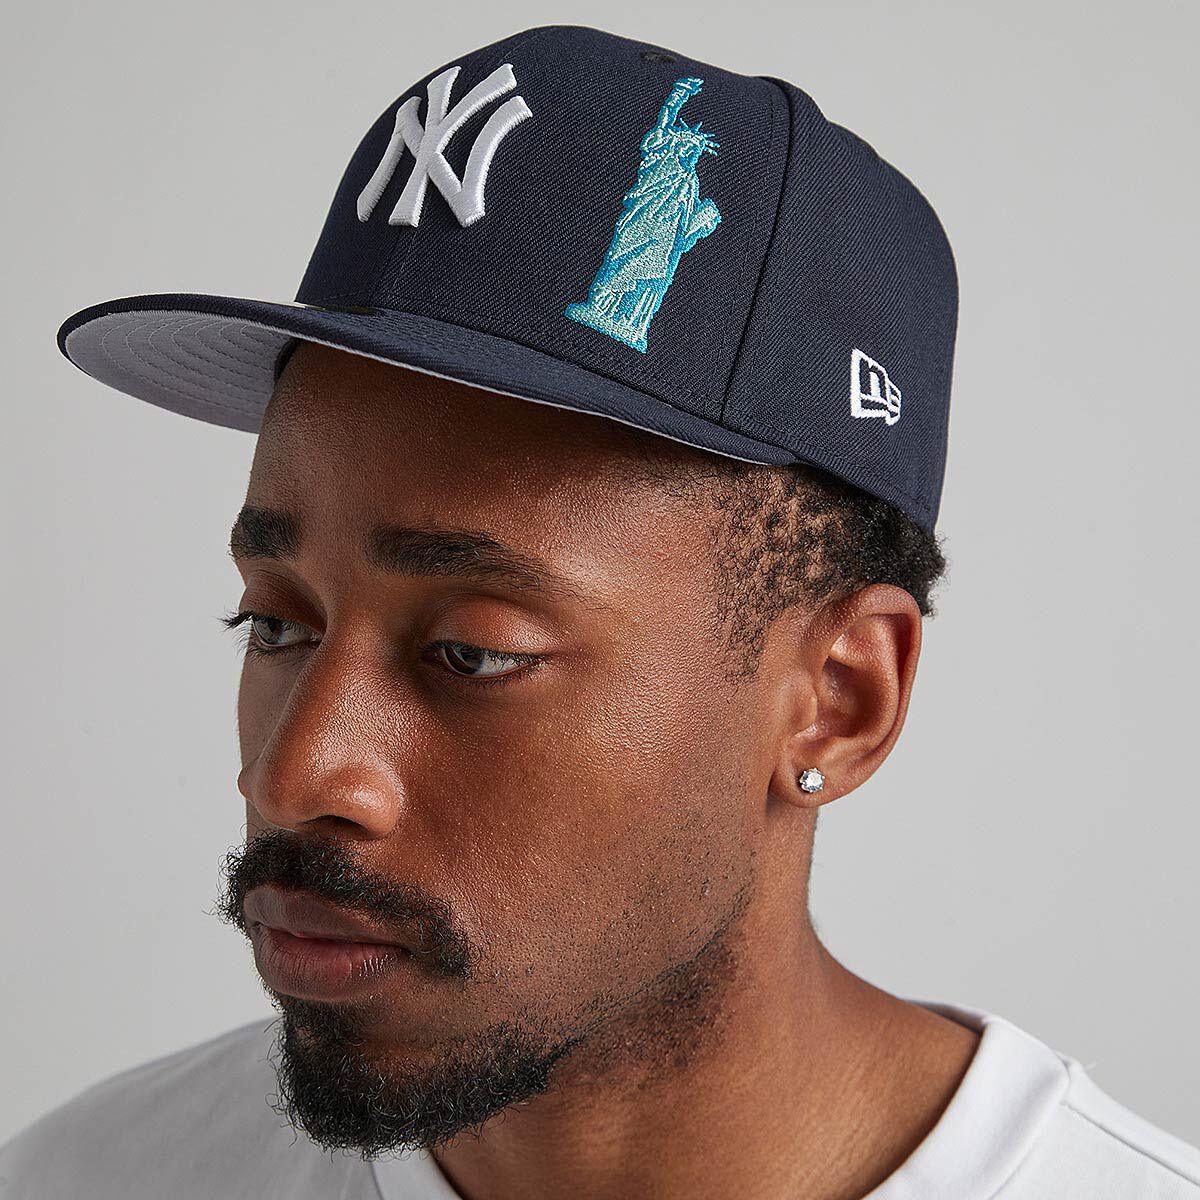 Buy MLB NEW YORK YANKEES CITY DESCRIBE 59FIFTY CAP for EUR 27.90